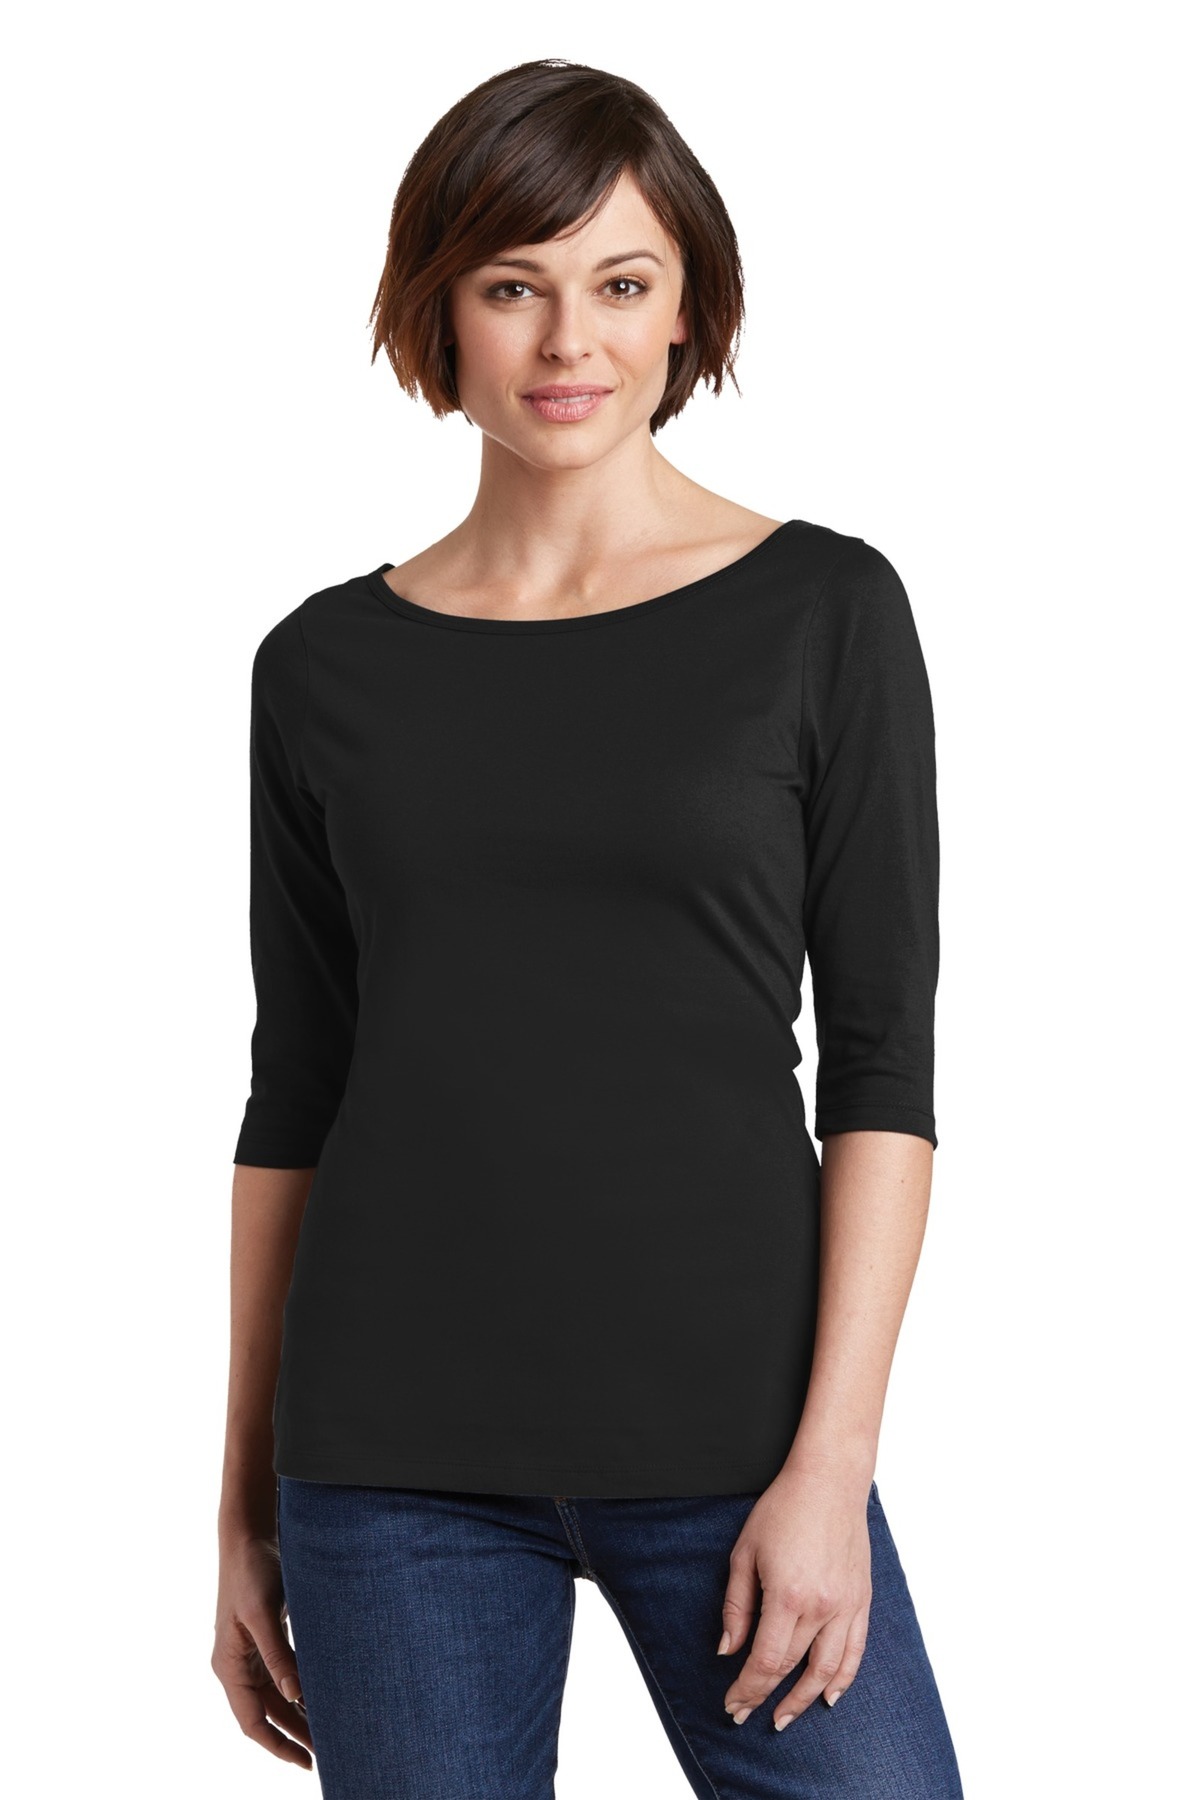 District Made Printed Women's Perfect Weight 3/4-Sleeve Tee | Women's ...